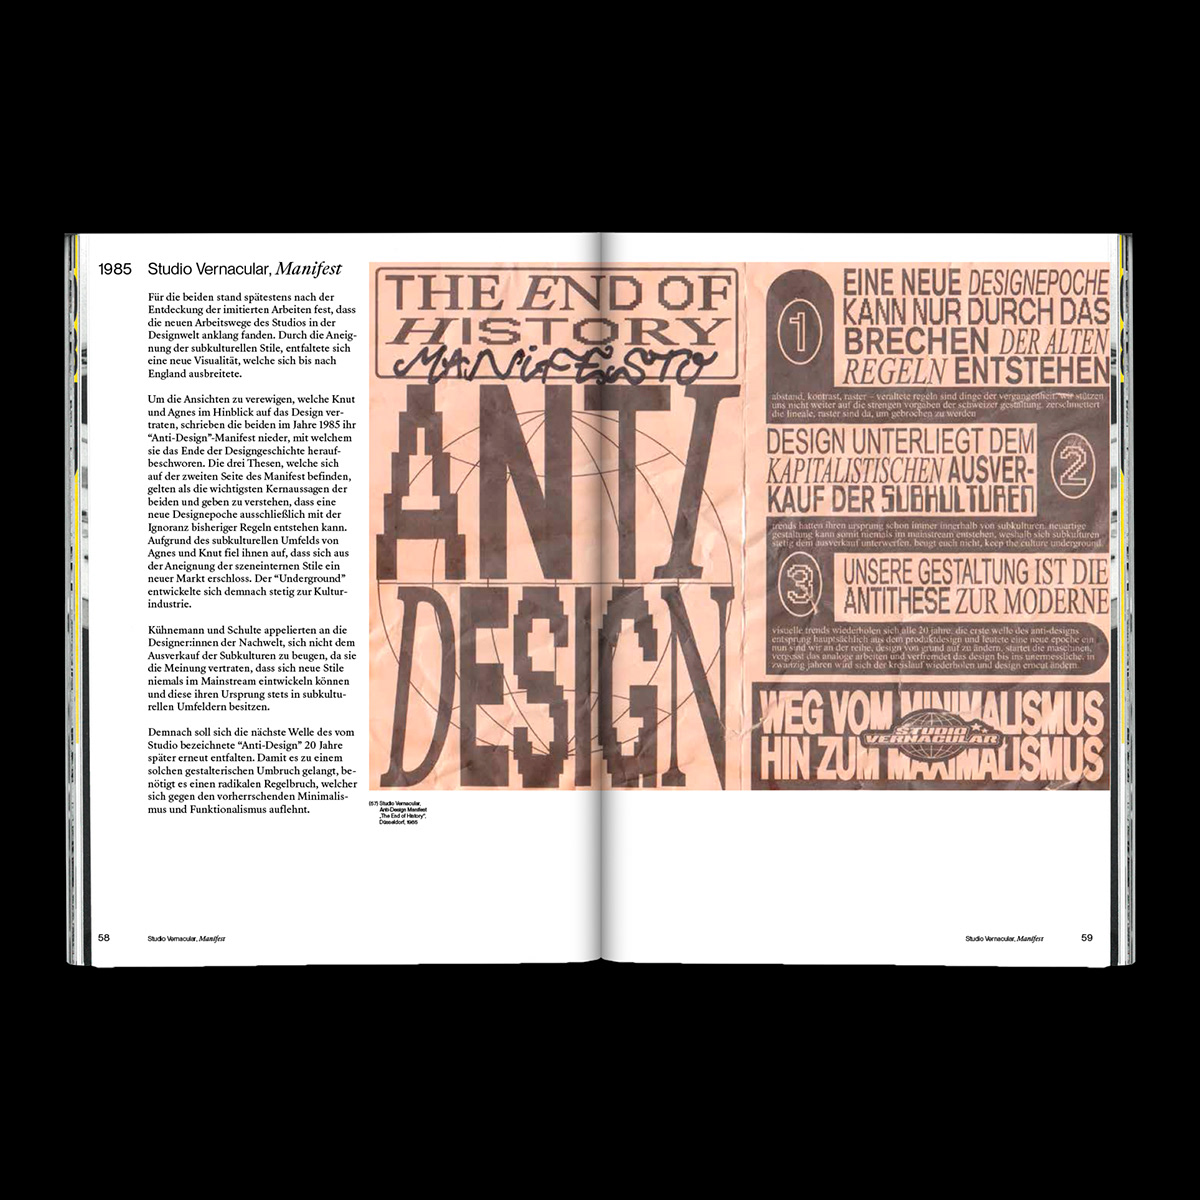 Layout Design and grid system for the Anti Design Manifesto